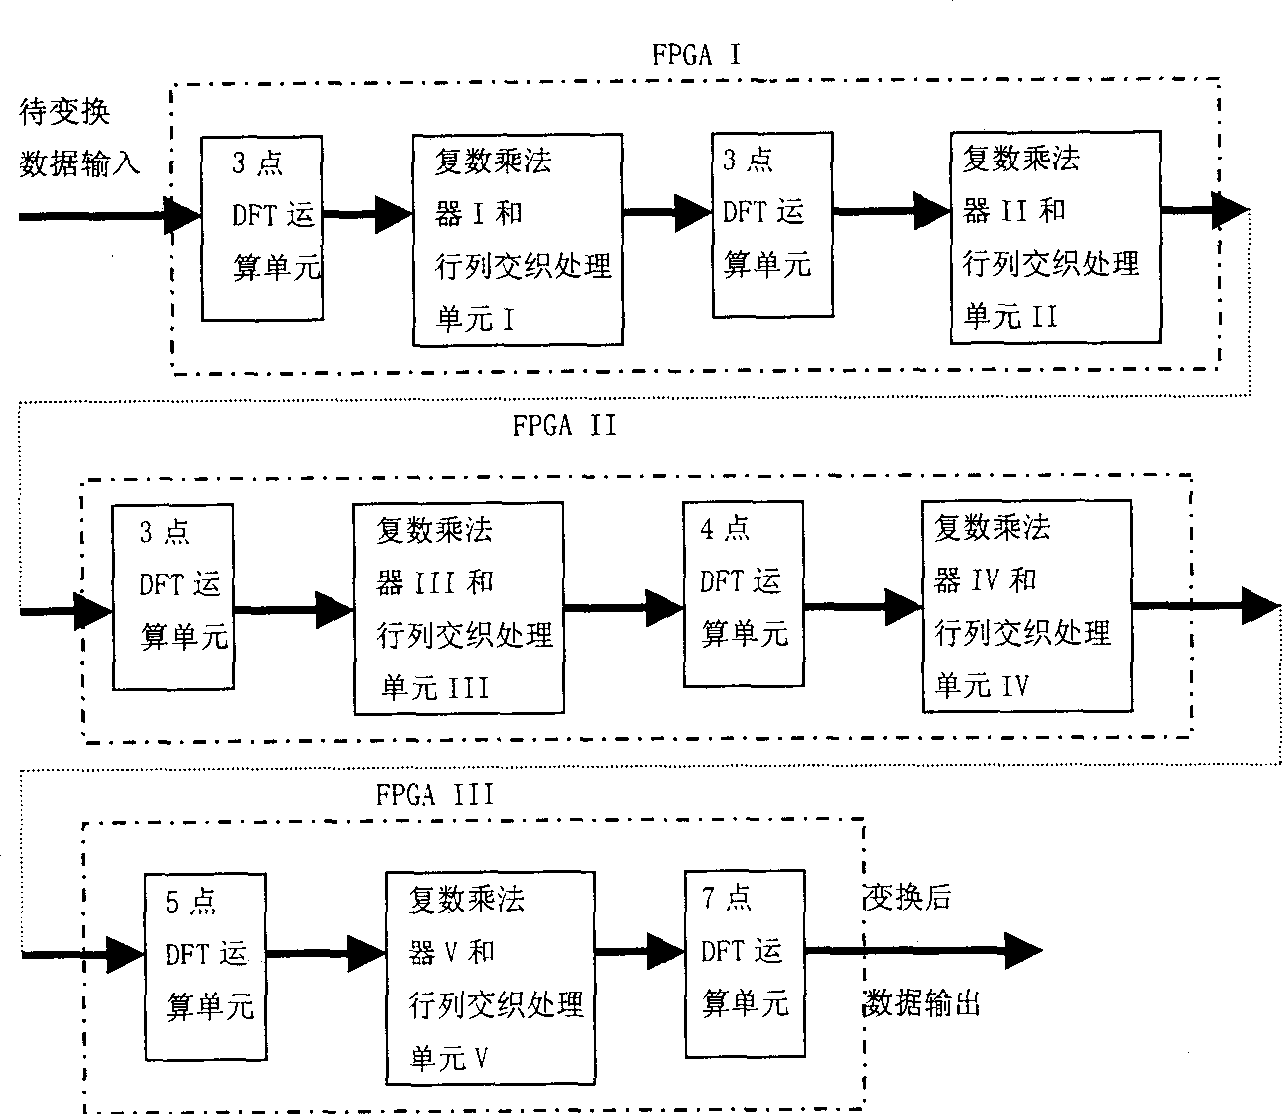 Discrete 3780-point Fourier transformation processor system and its structure